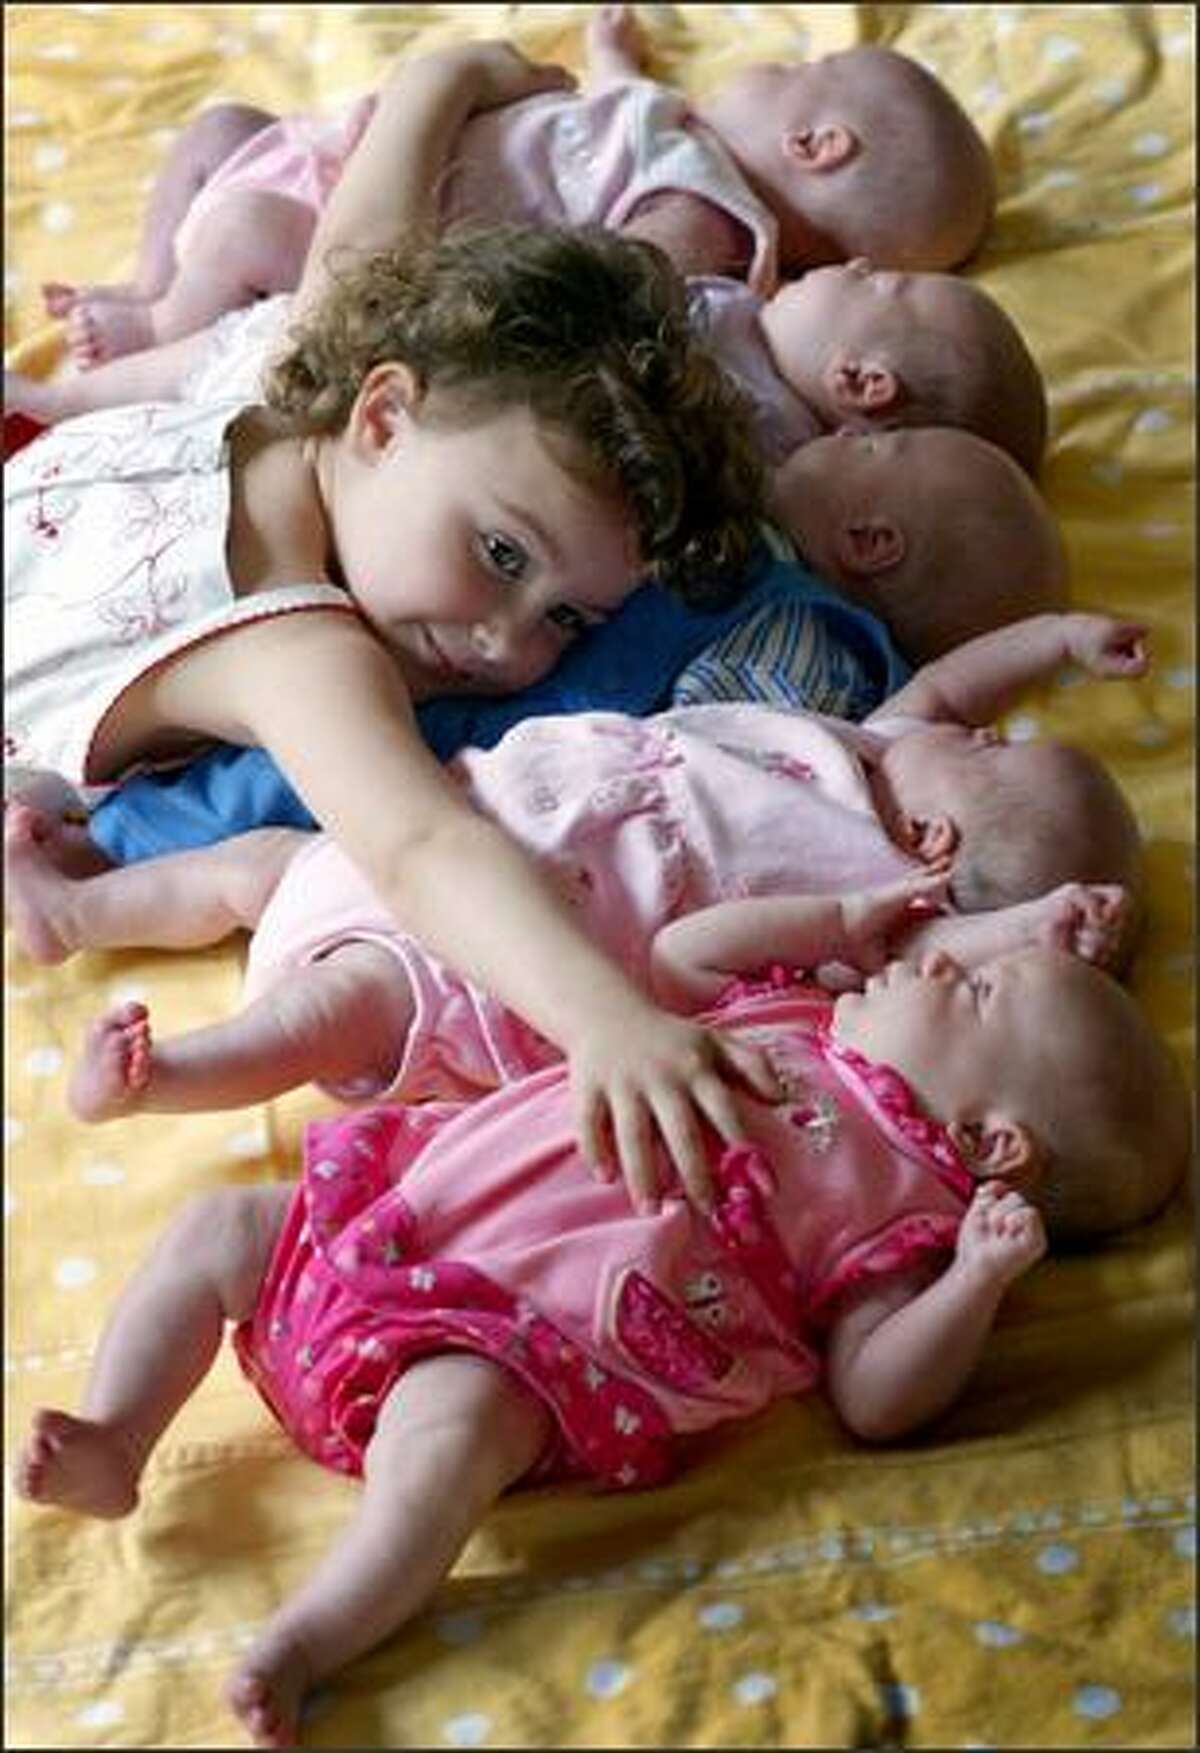 Lilli Stevenson, 3, tries to hug all of her new siblings at once at their home in Poulsbo. They're the first recorded set of quintuplets born in Western Washington. From the top: Belle, Scarlett, Weston, Camilee and Aniston were born March 30. Lilli is a very involved big sister.